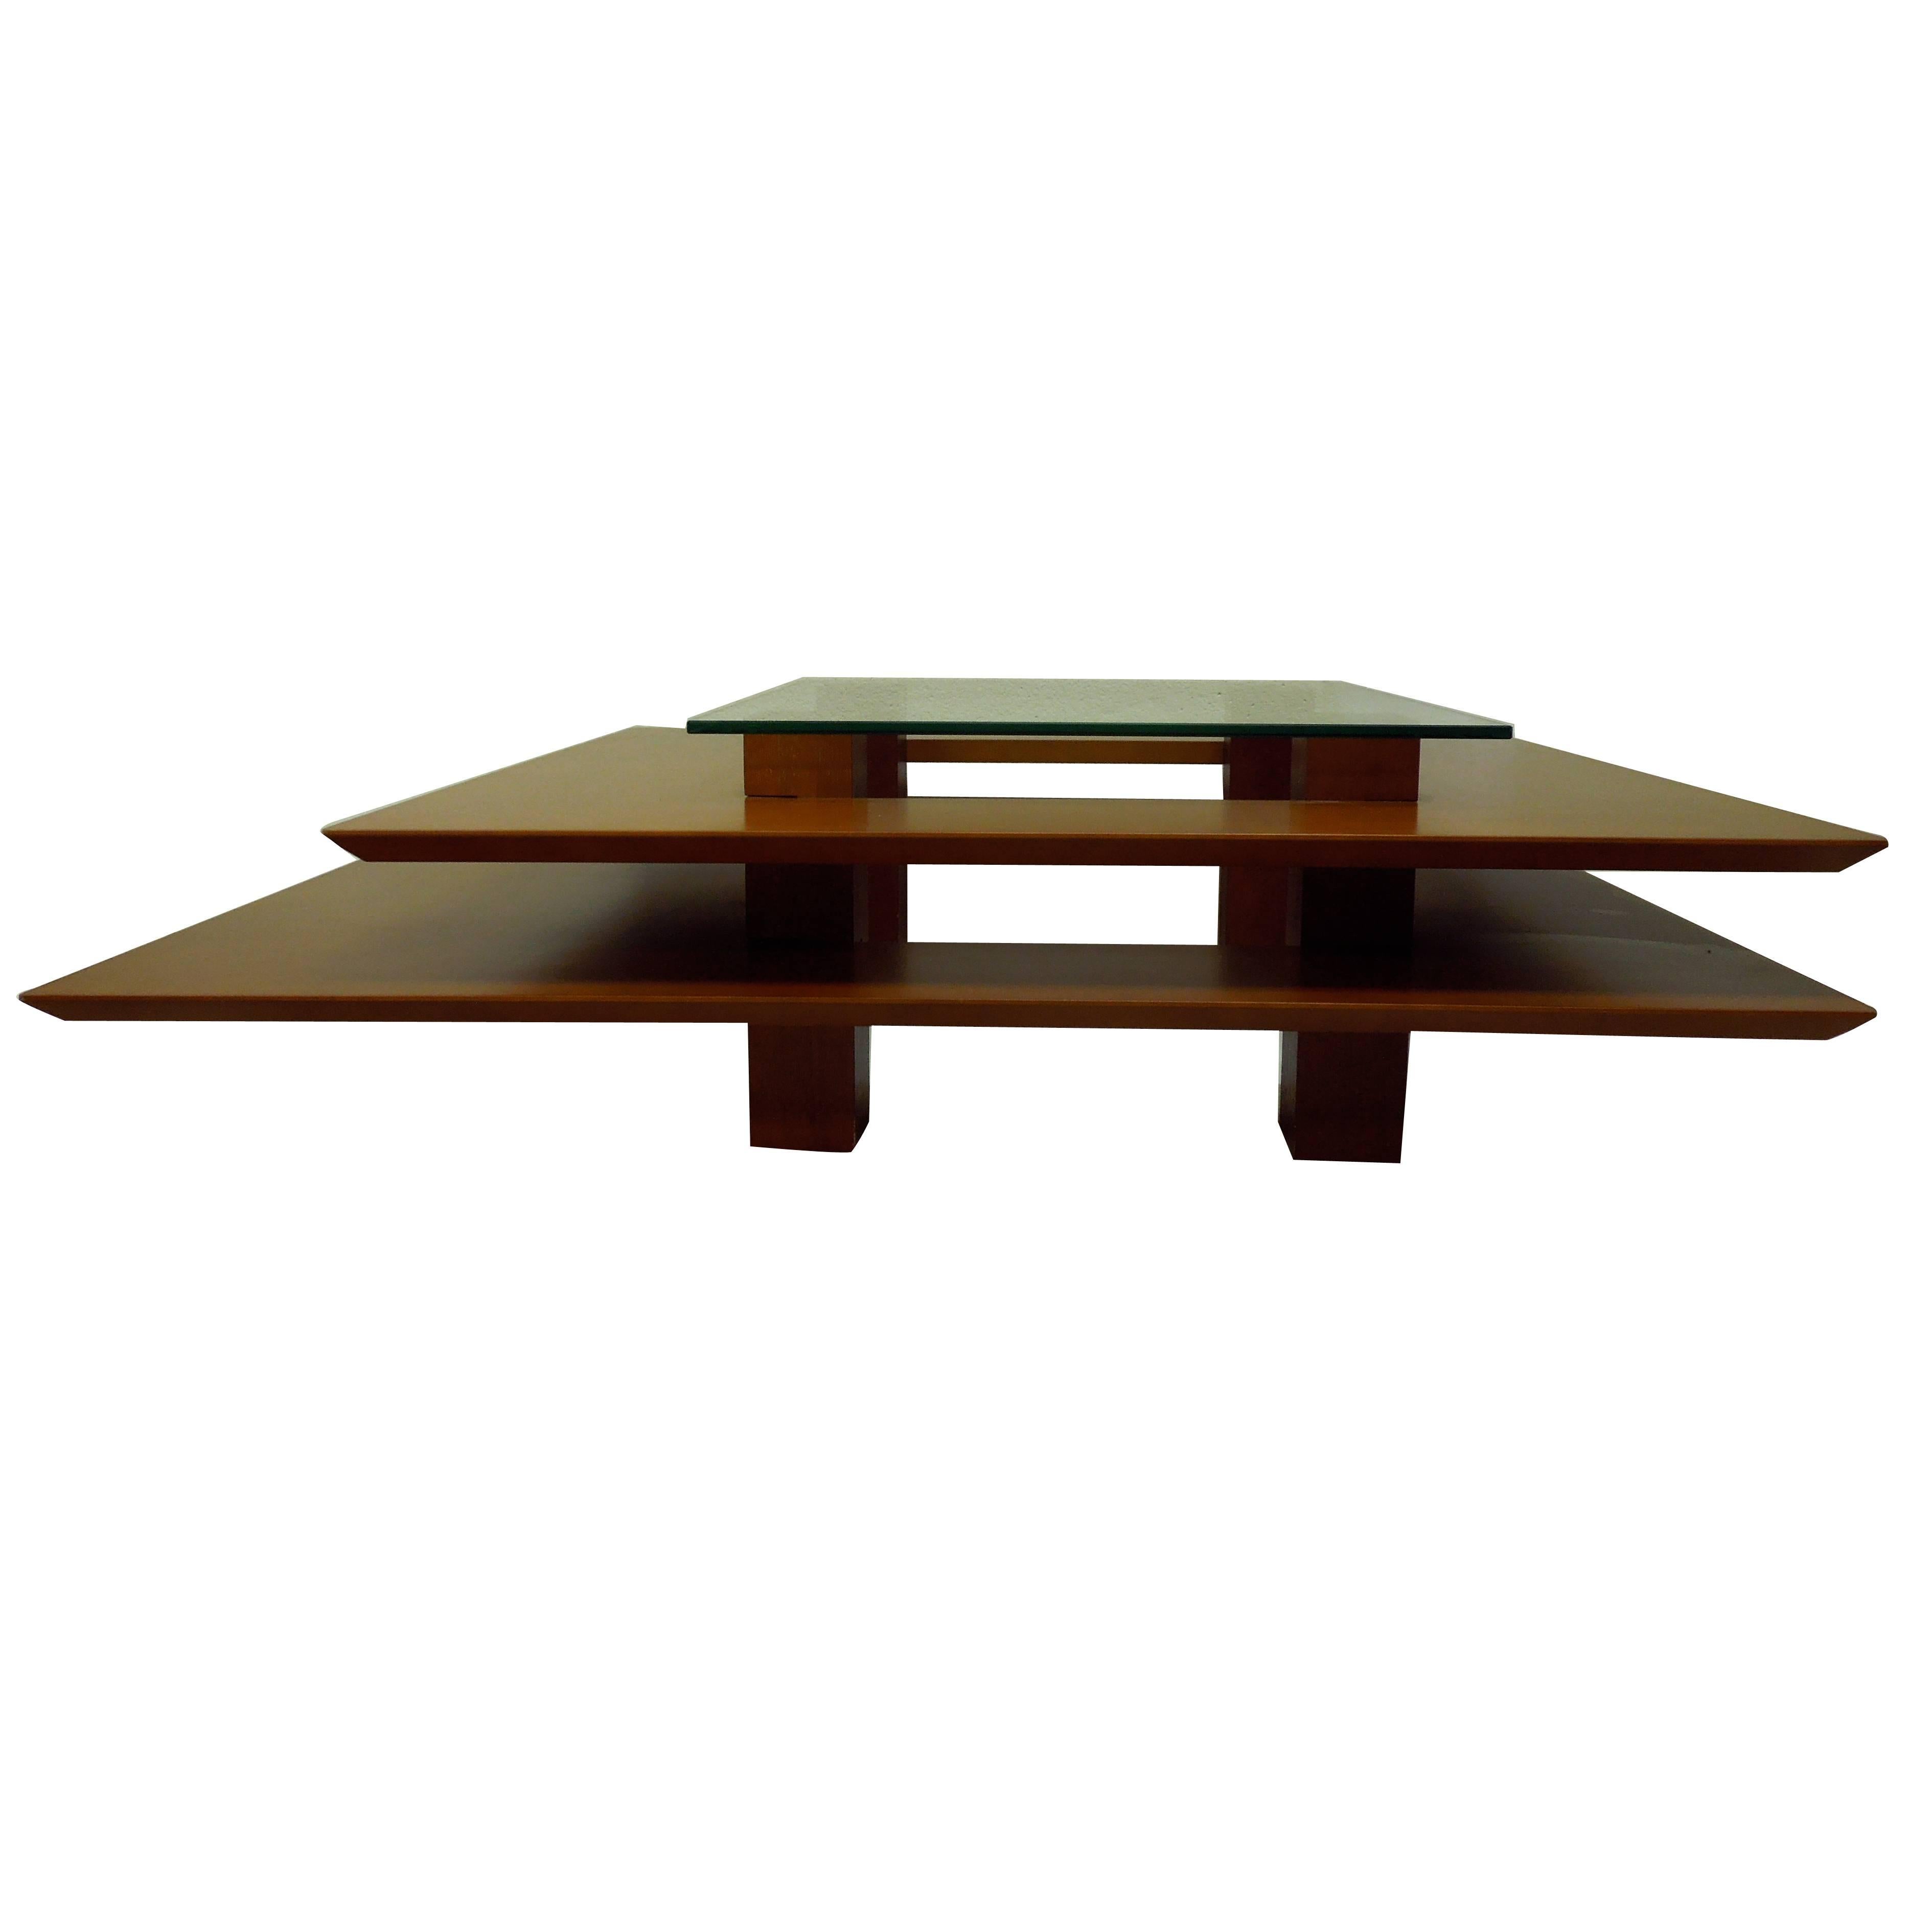 Three-Tier 1990s Vintage French Modern Coffee Table by Clemmer Heidsieck